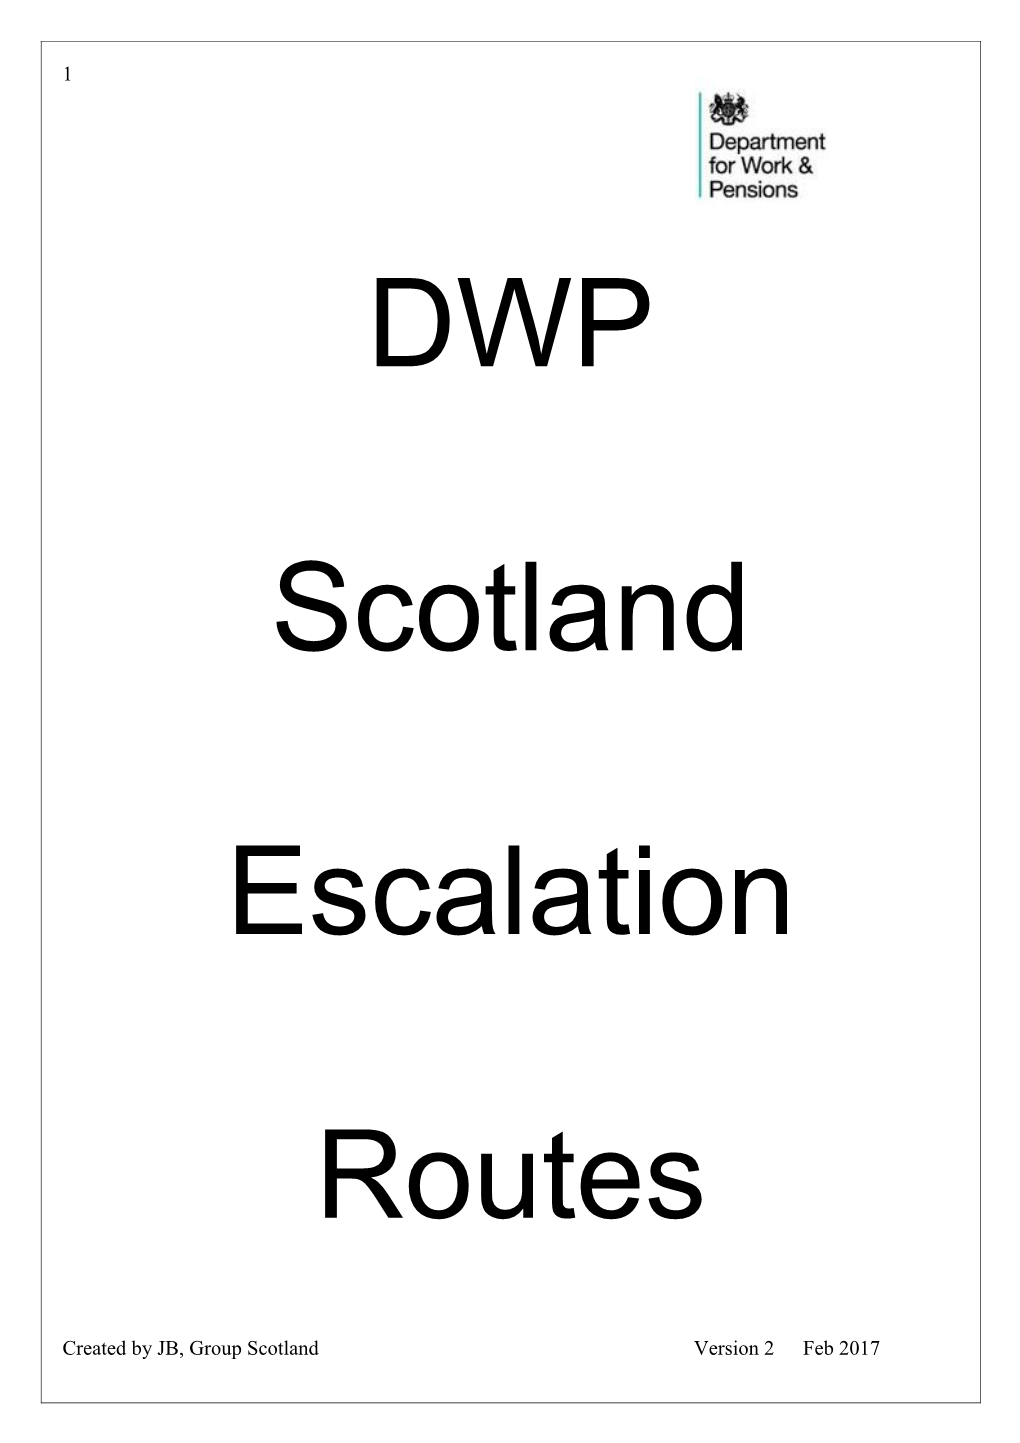 Communication and Escalation Routes for Benefit Centres, Jobcentre Districts, DWP & Partners